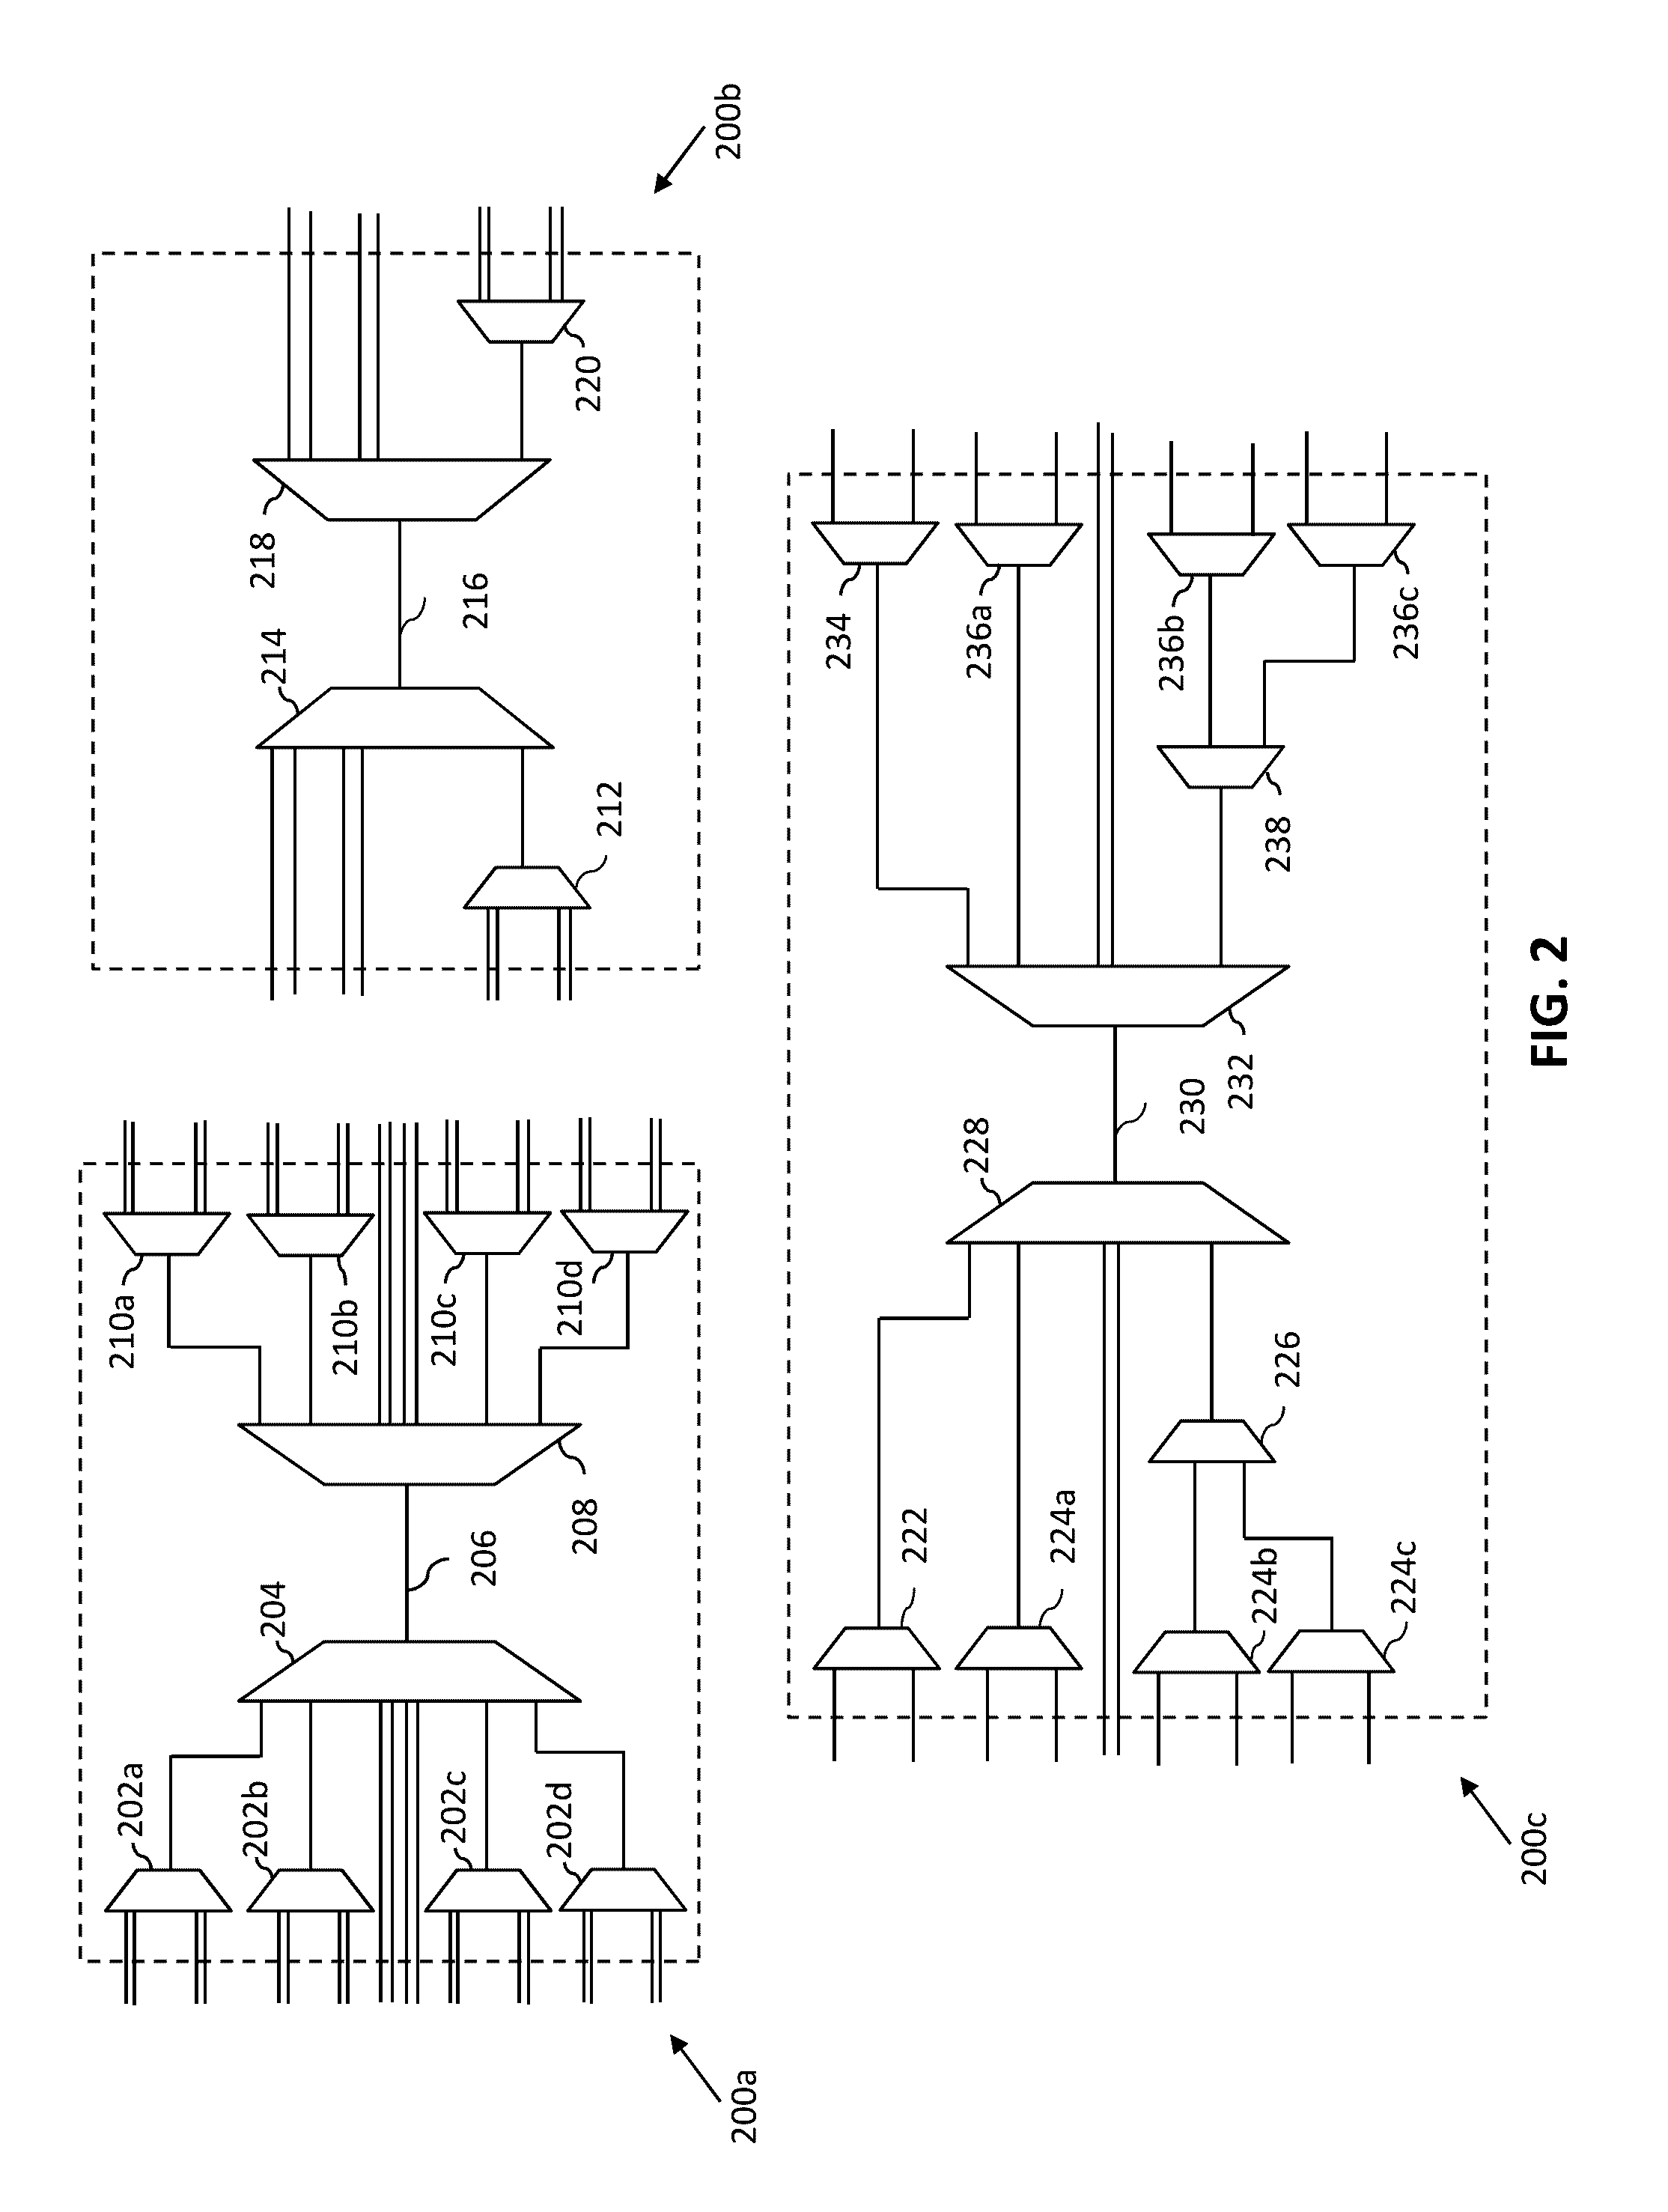 Compound semiconductor photonic integrated circuit with dielectric waveguide